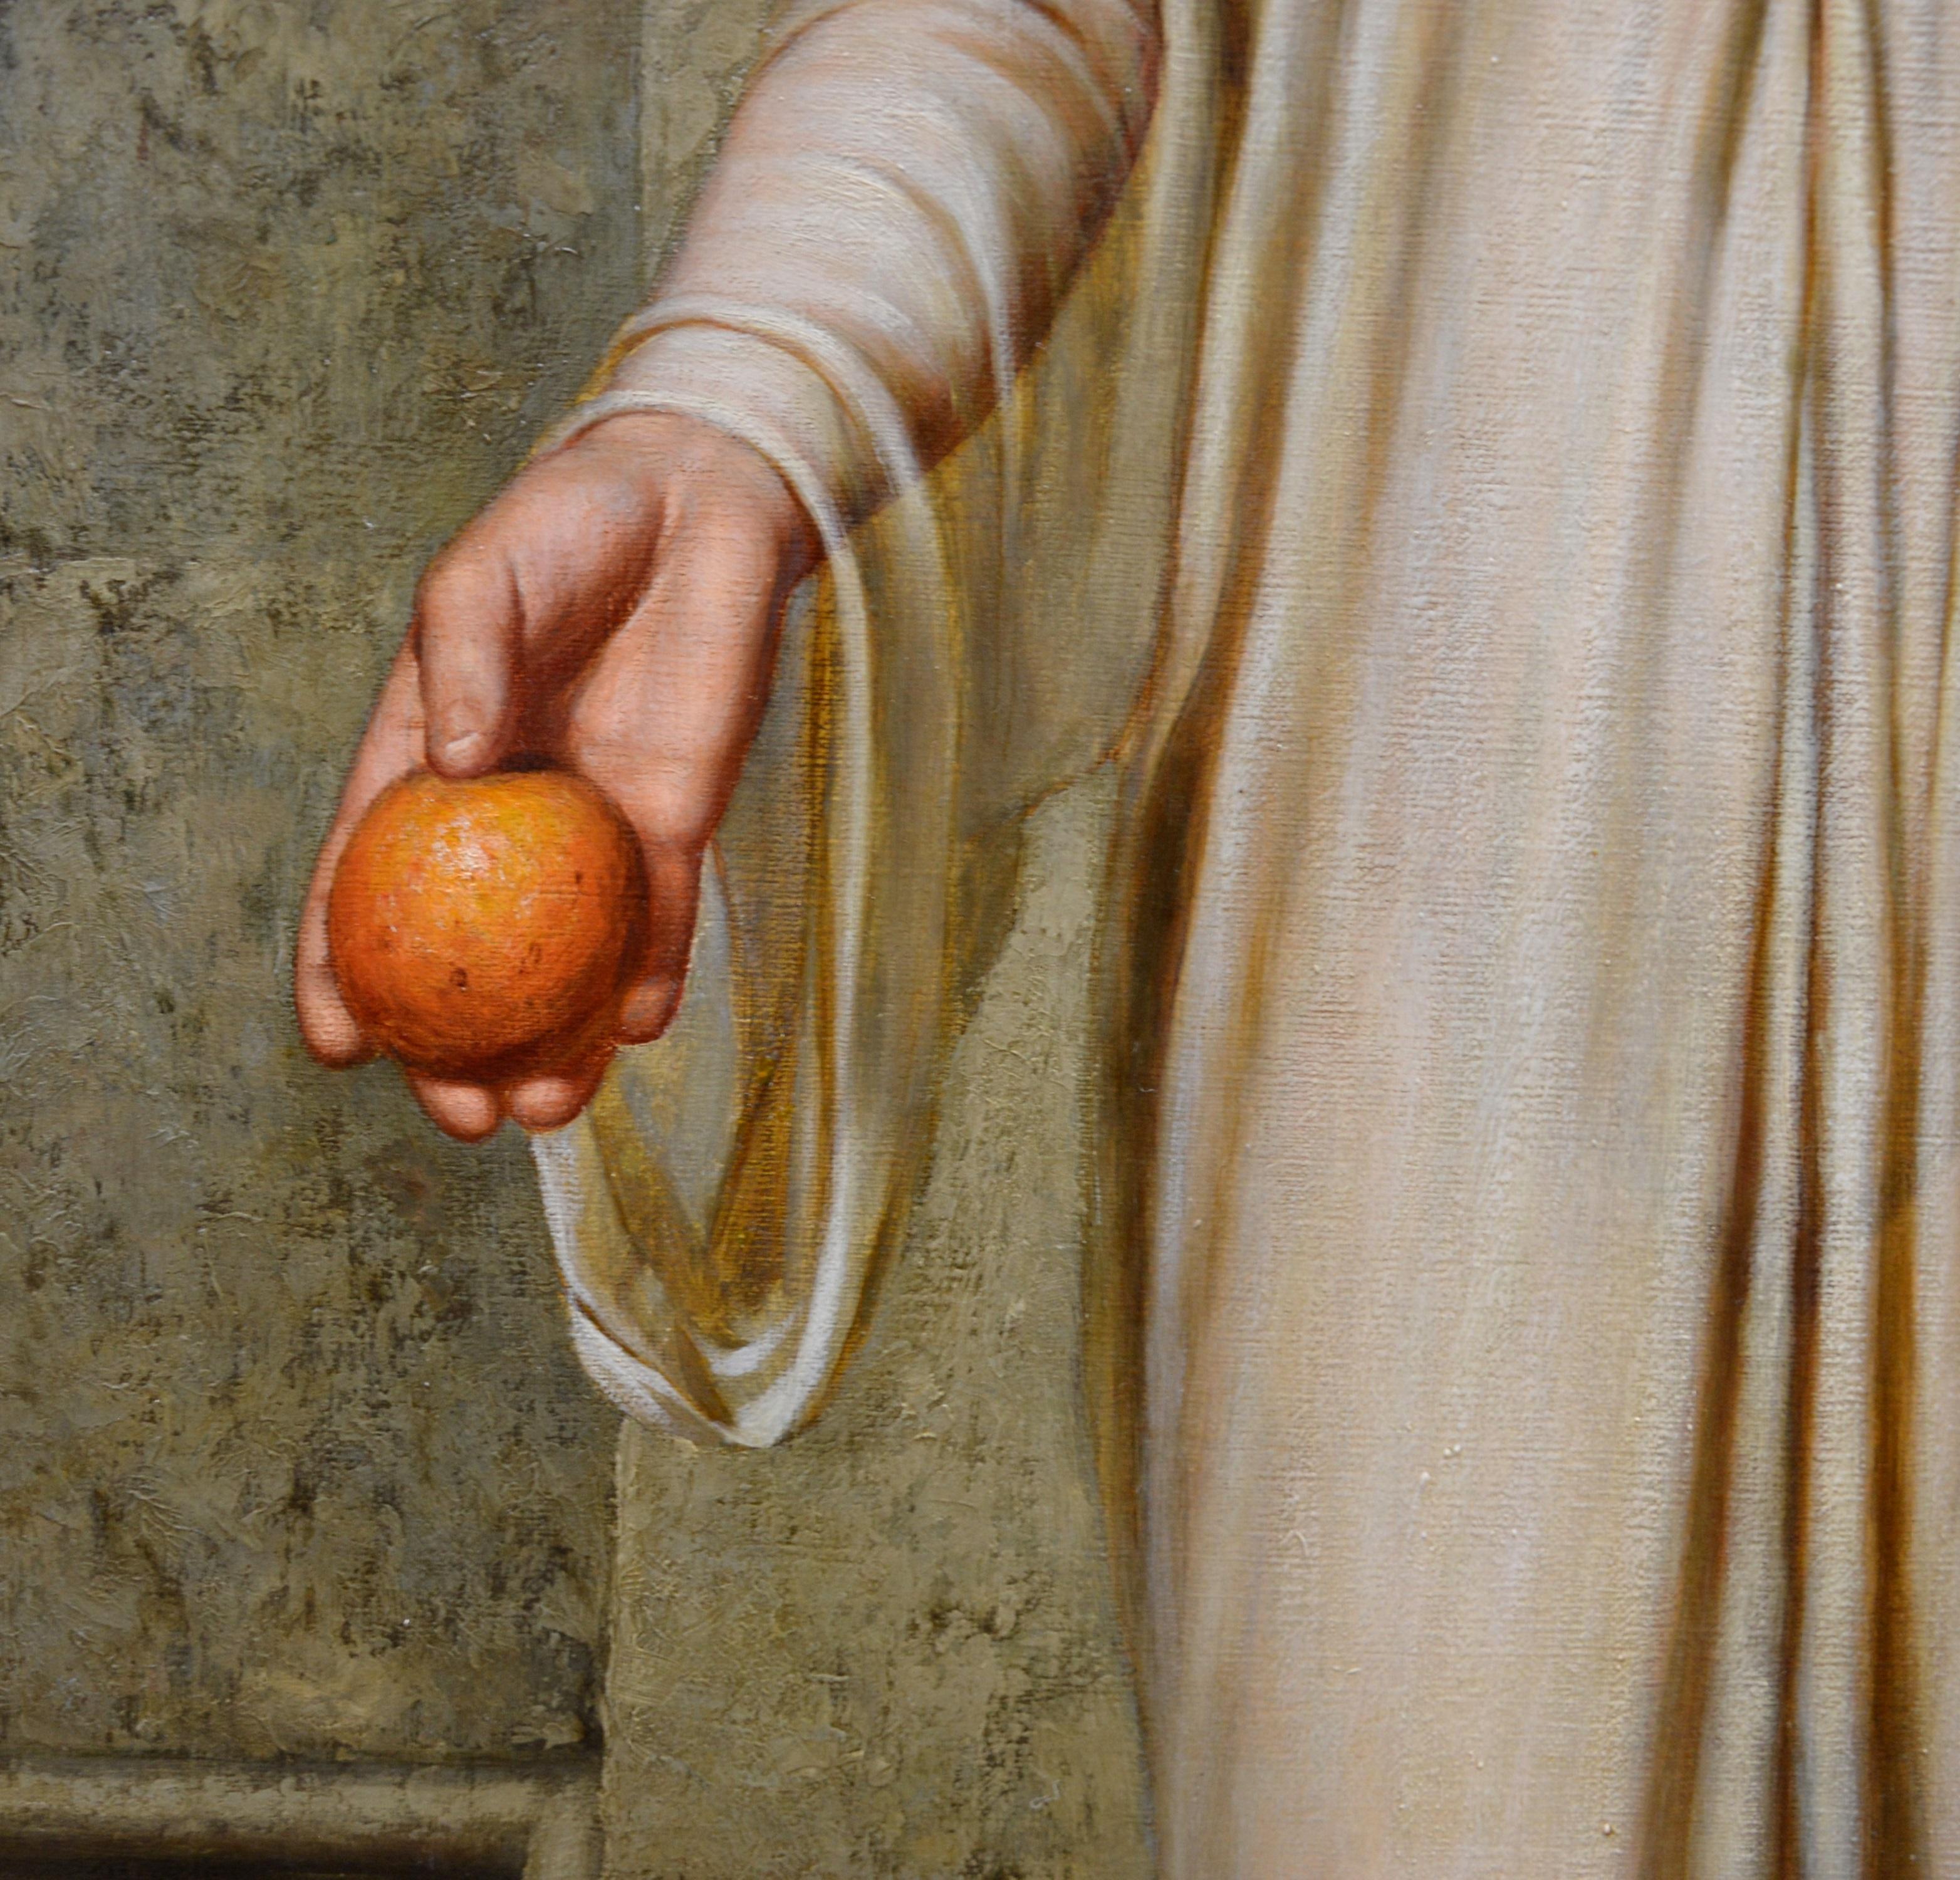 This is a large fine oil 19th century oil on canvas depicting a young woman of Ancient Rome in a sheer subucula tunic selling ‘Oranges’ by the Victorian neoclassical painter Arthur Hill RBA (1820-1920). The painting is signed and dated by the